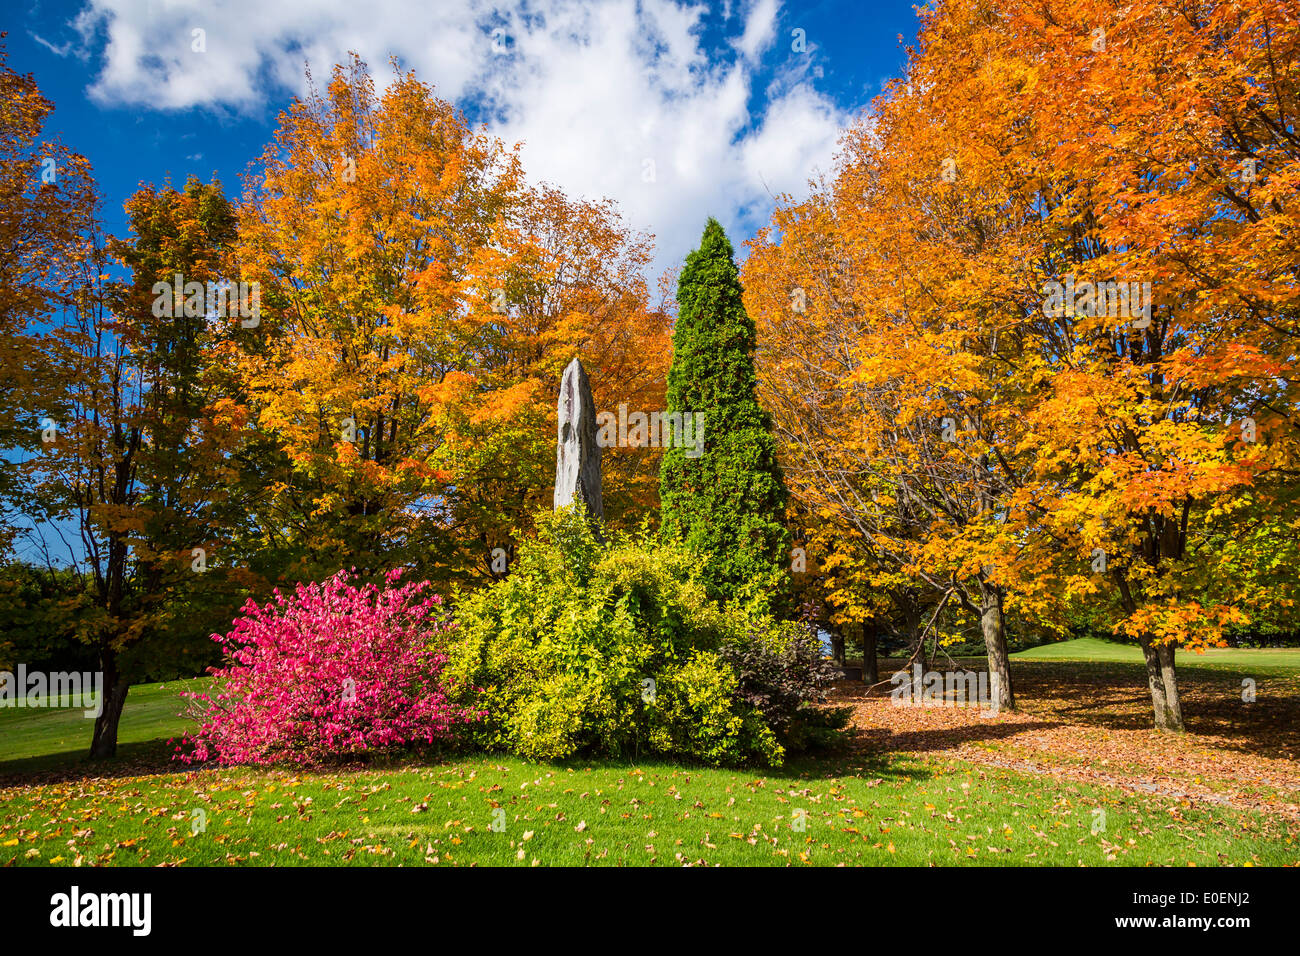 Brilliant fall foliage color in the Eastern Townships of Quebec, Canada. Stock Photo